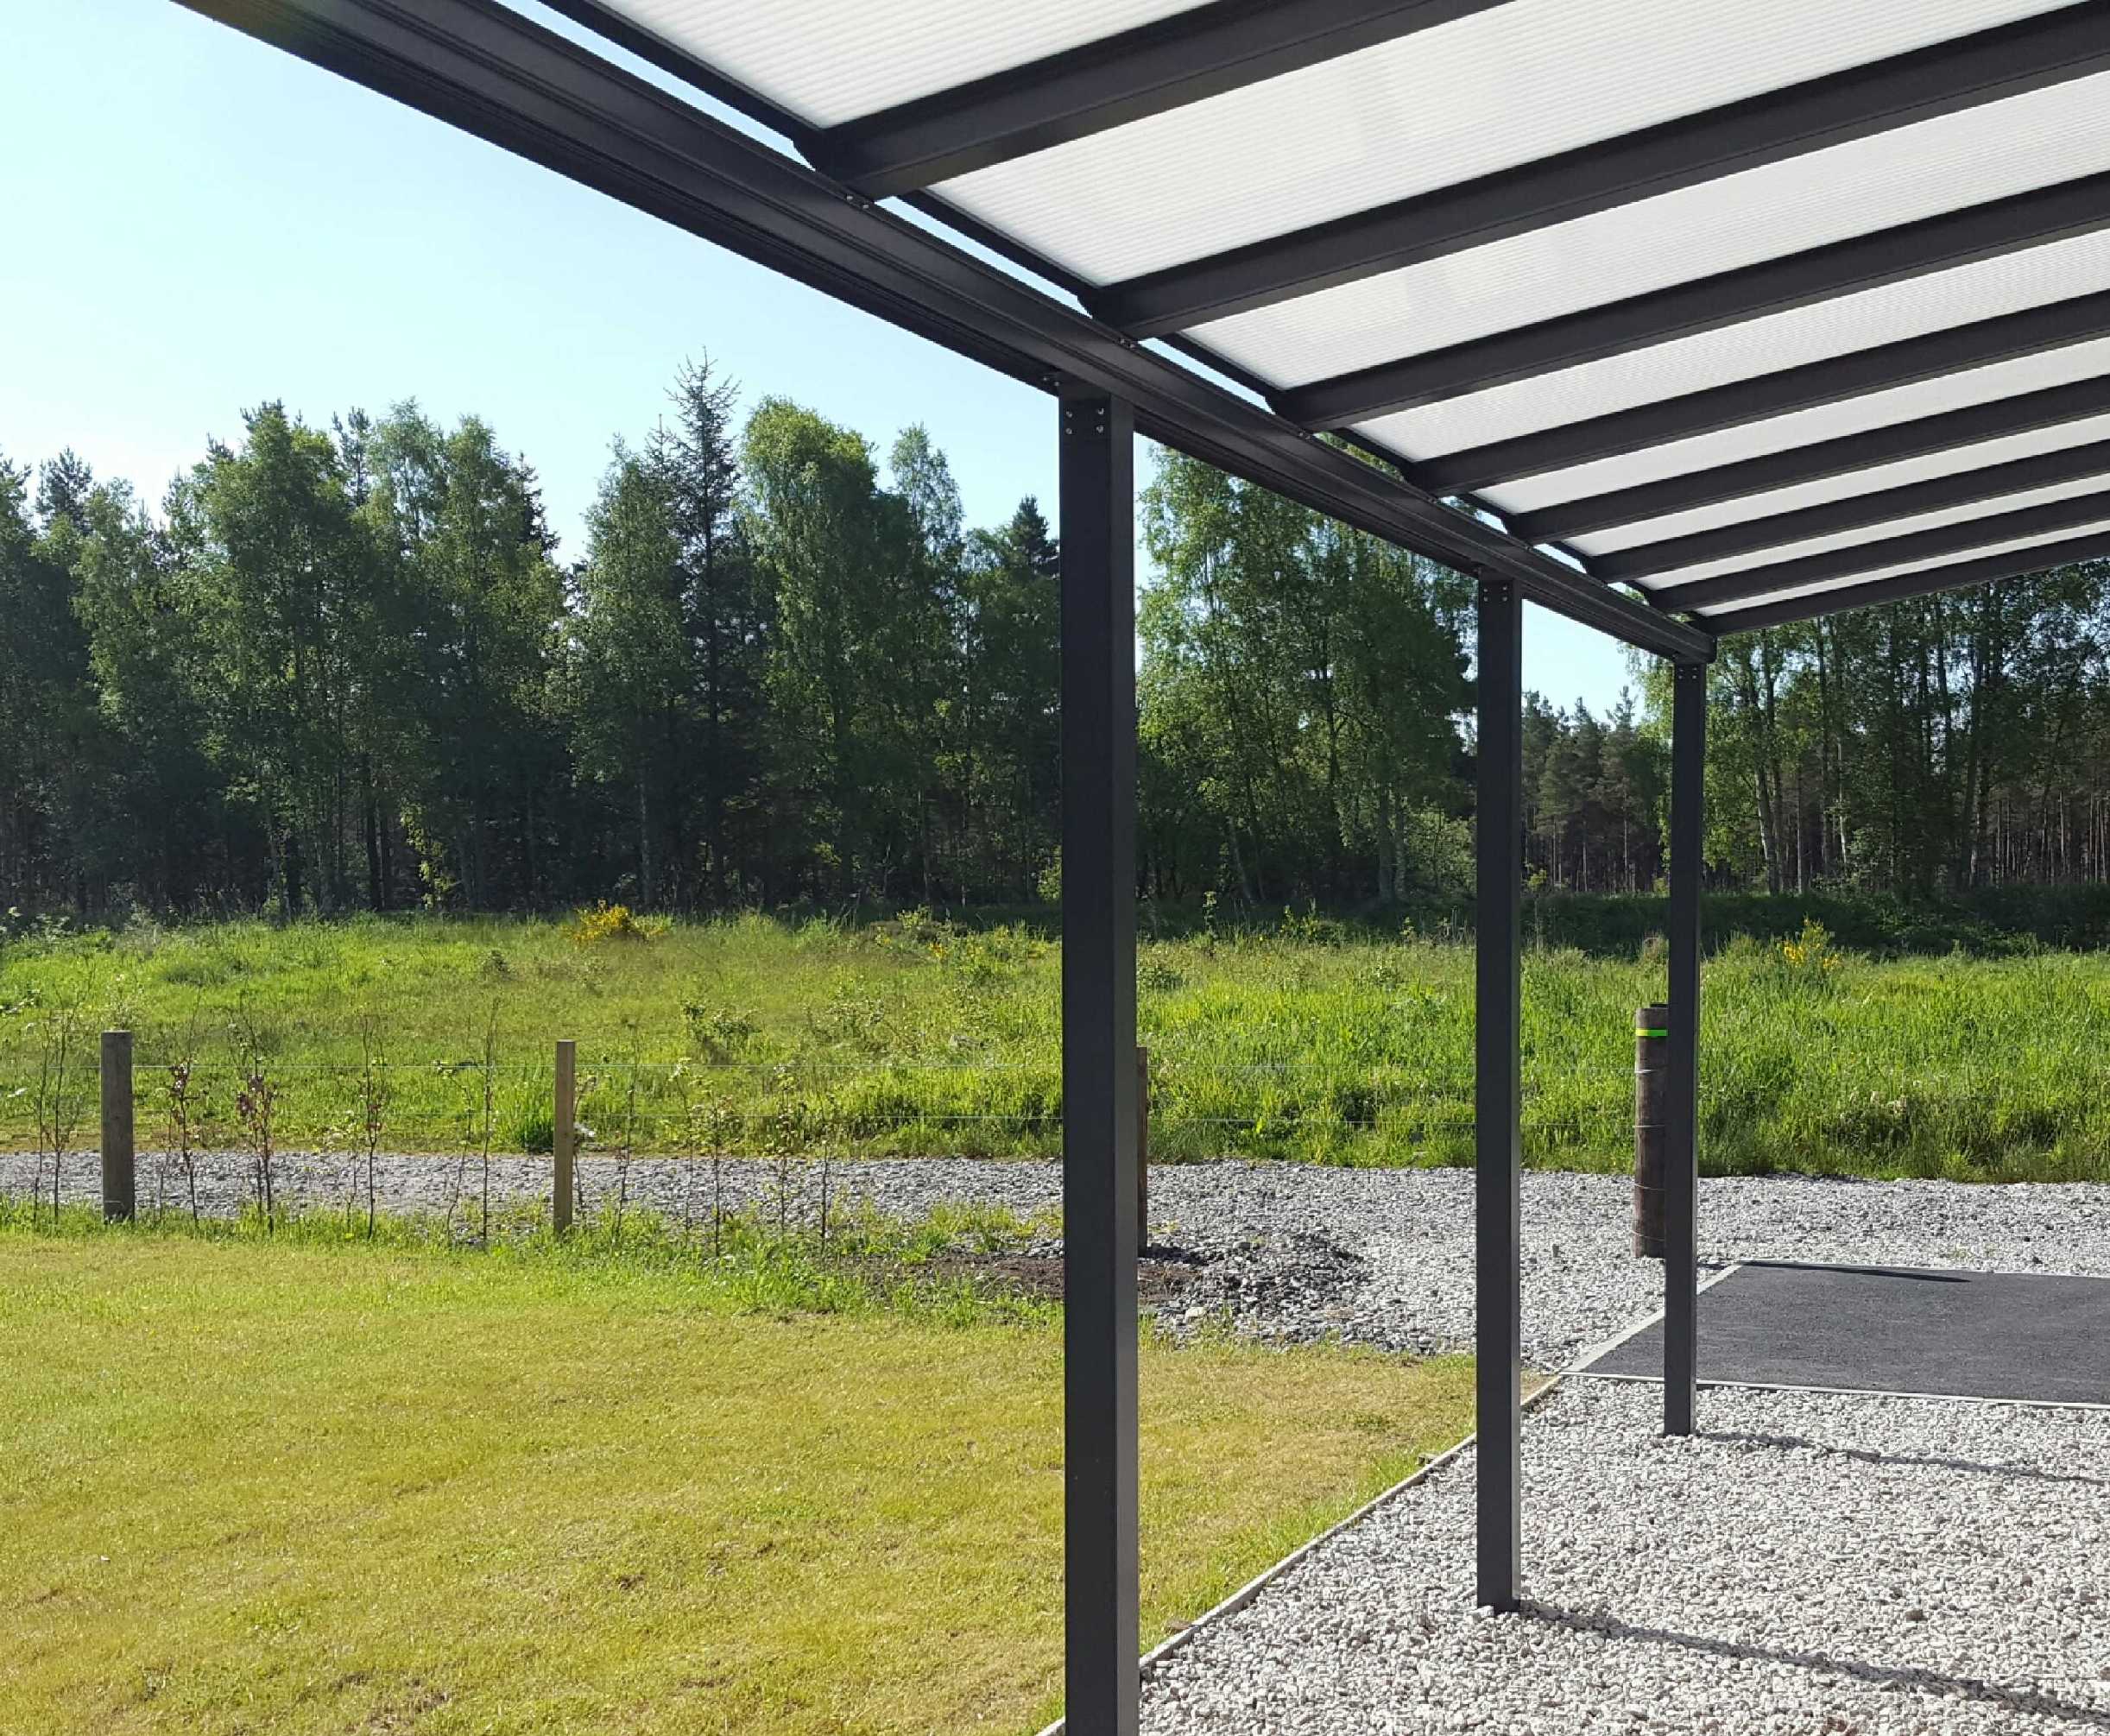 Omega Smart Lean-To Canopy, Anthracite Grey, 6mm Glass Clear Plate Polycarbonate Glazing - 9.1m (W) x 1.5m (P), (5) Supporting Posts